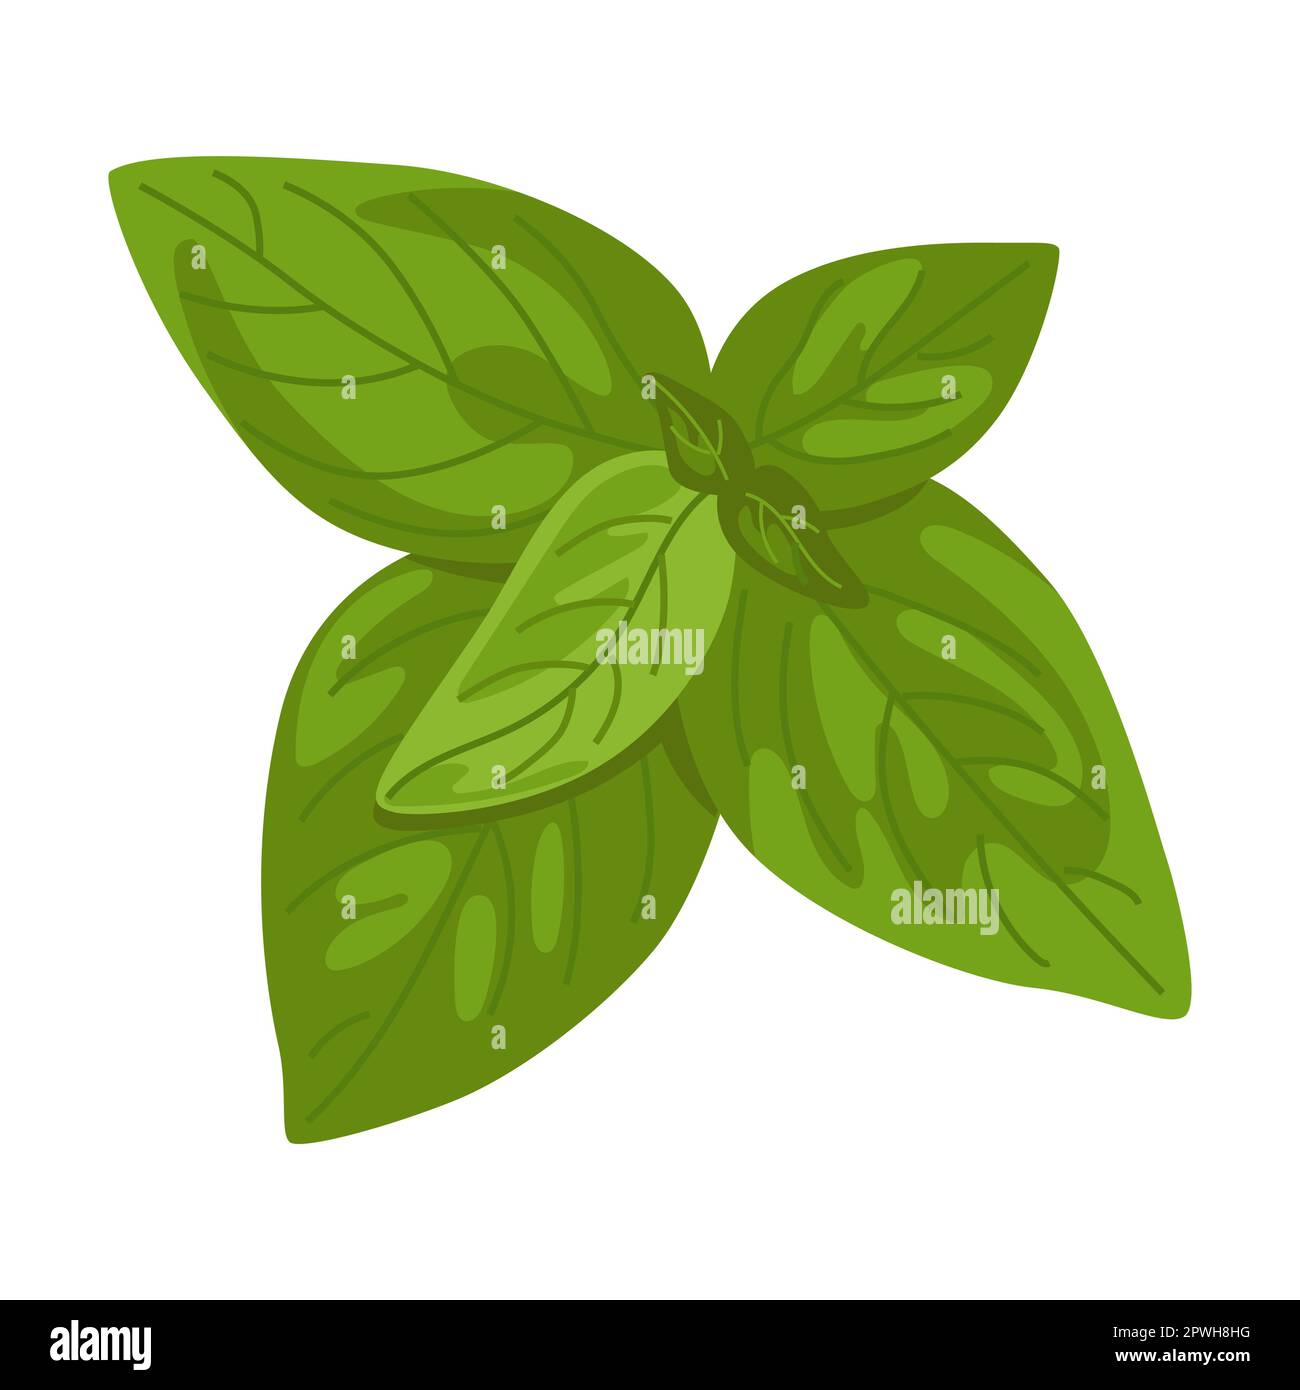 Basil herb and leaves vector illustration. Spicy herbal plants, parsley, rosemary, coriander, oregano, mint on white background Stock Vector